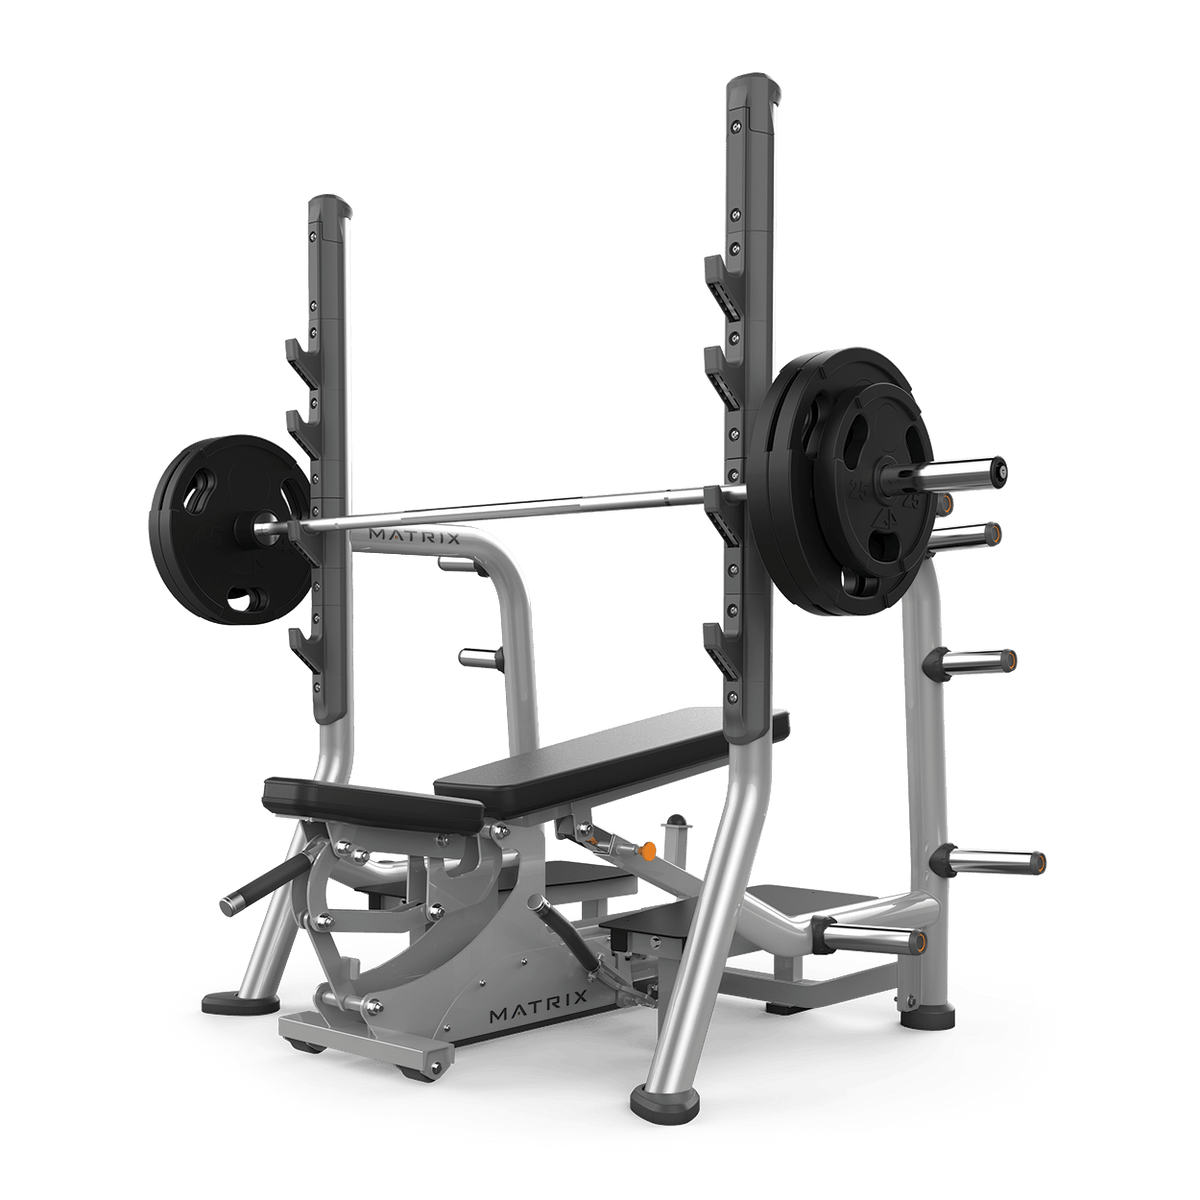 Magnum 3-Way Olympic Bench